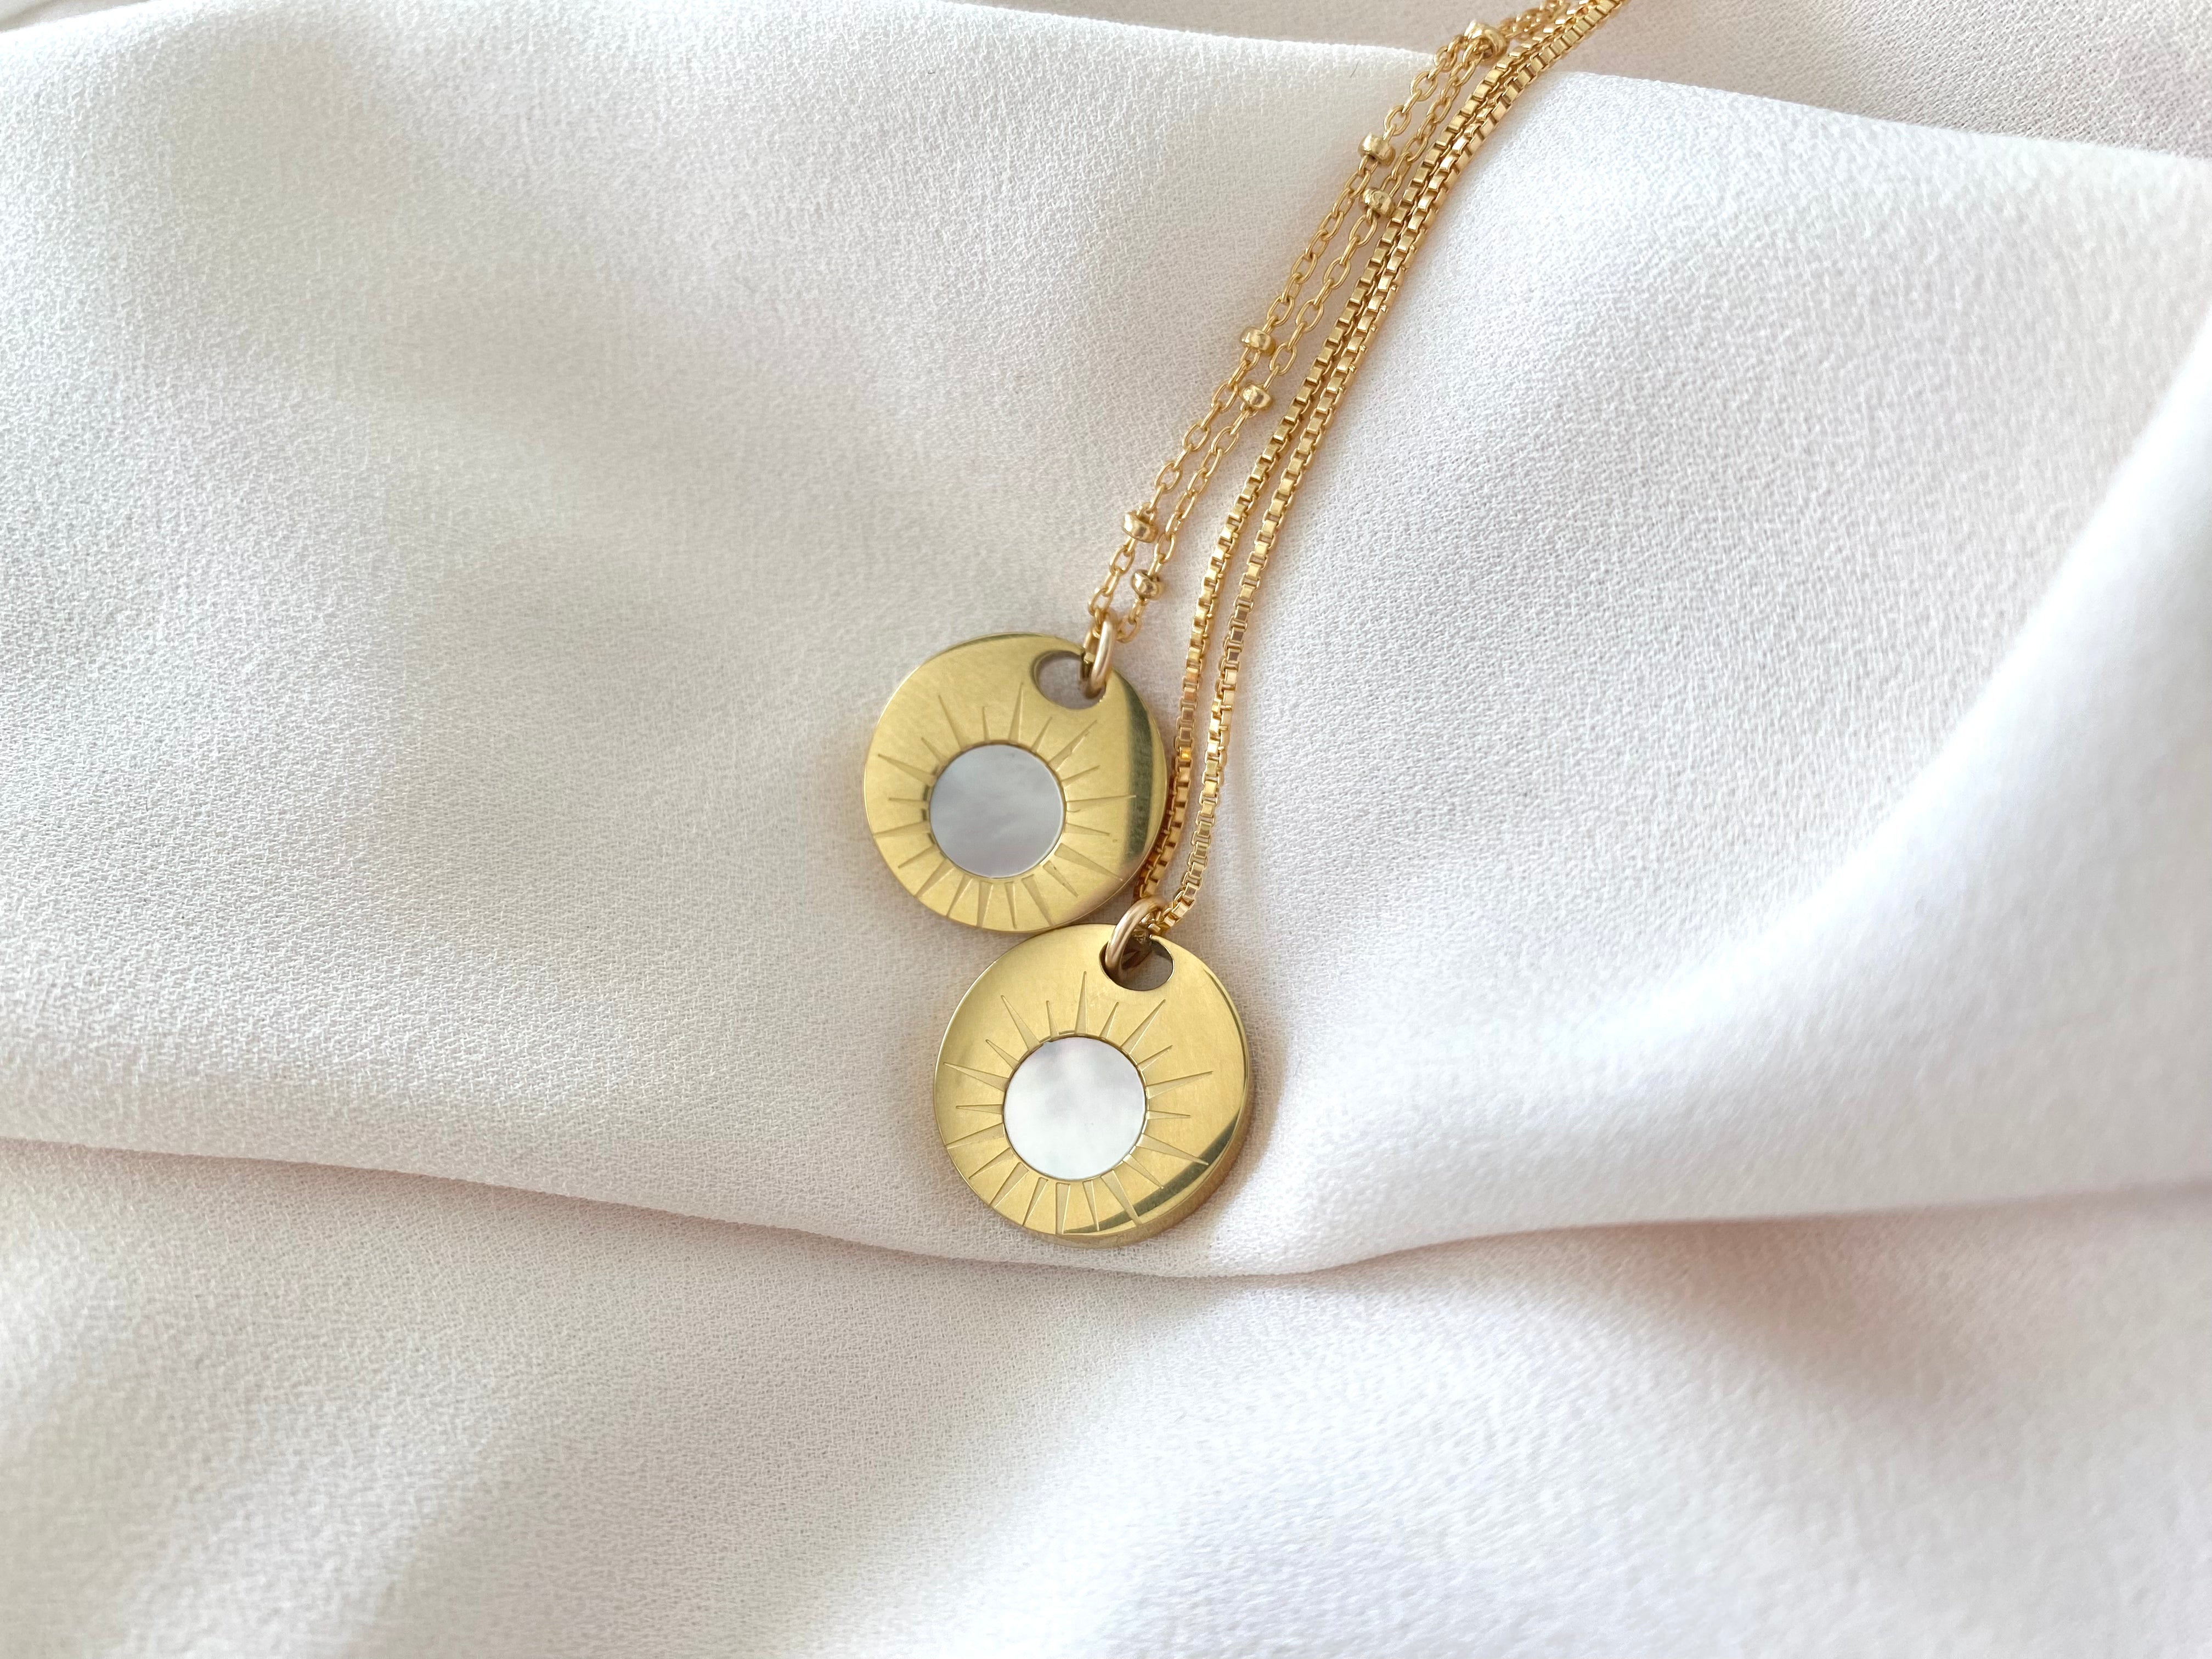 Gold Filled Medallion Coin Necklace Mother of Pearl Pendant Minimalist Layering Necklaces Thick Chunky Gold Coin Pendant Necklace Sun Disc